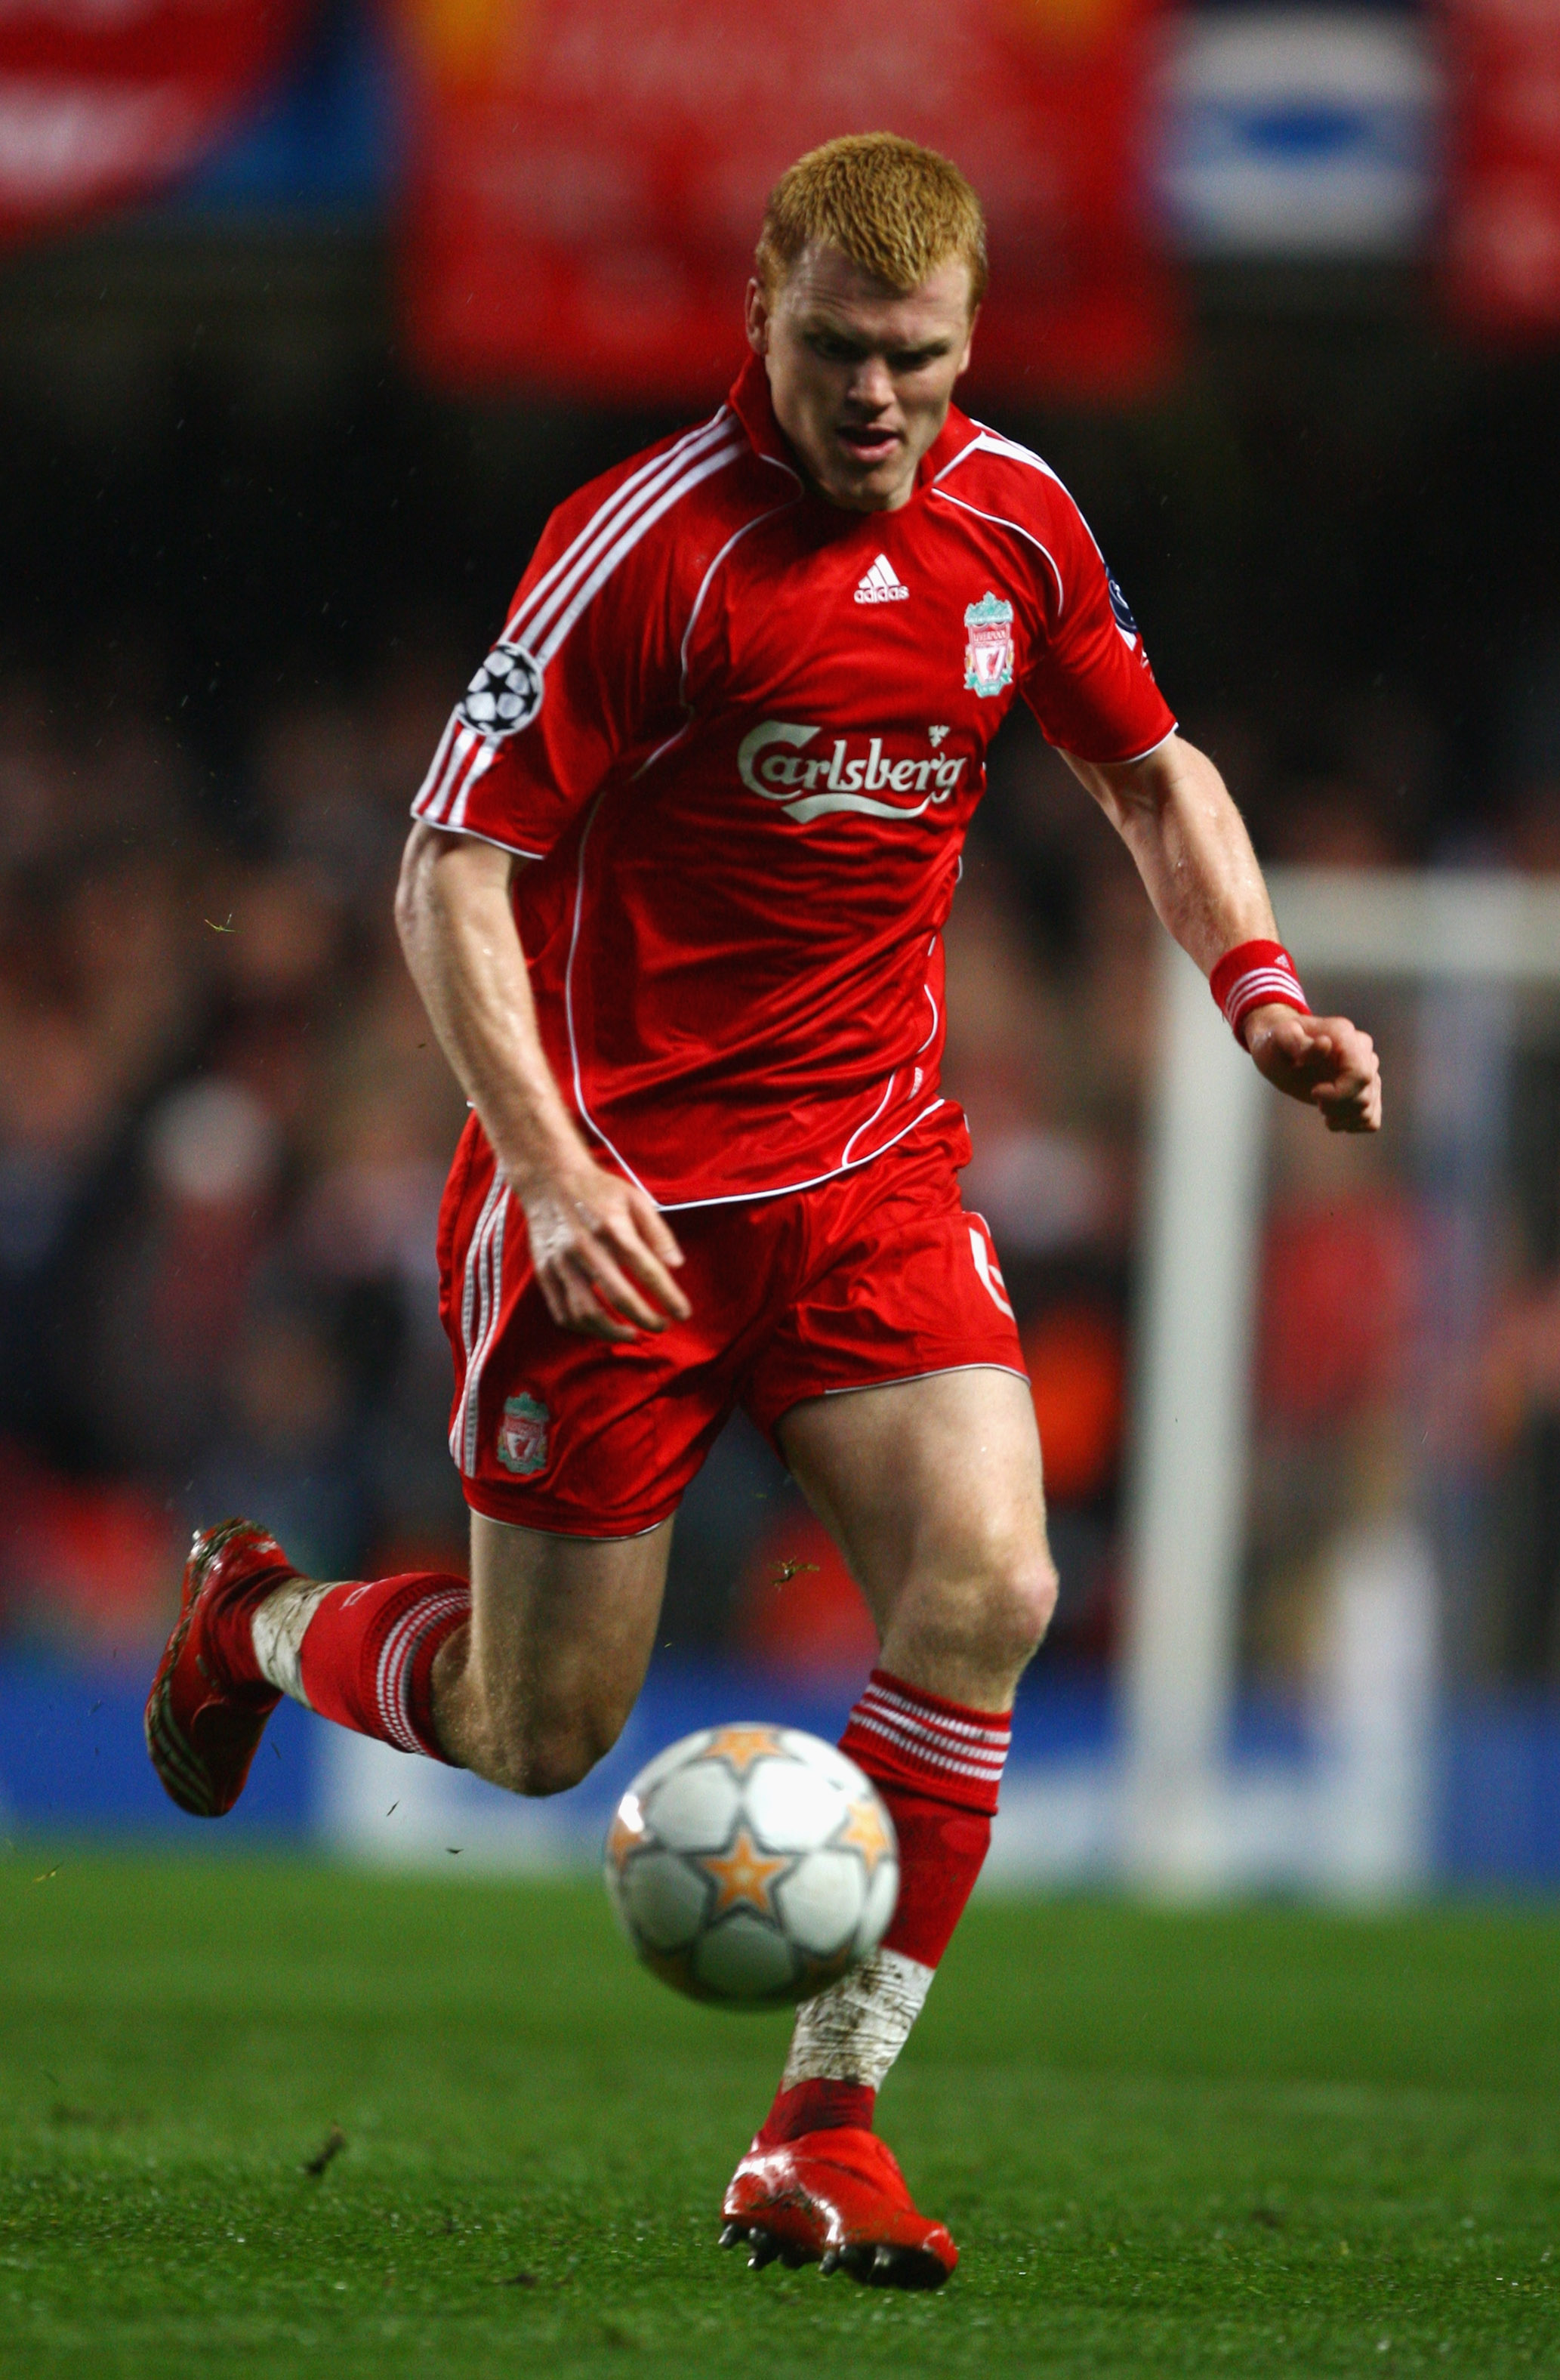 LONDON - APRIL 30:  John Arne Riise of Liverpool in action during the UEFA Champions League Semi Final 2nd leg match between Chelsea and Liverpool at Stamford Bridge on April 30, 2008 in London, England.  (Photo by Mike Hewitt/Getty Images)